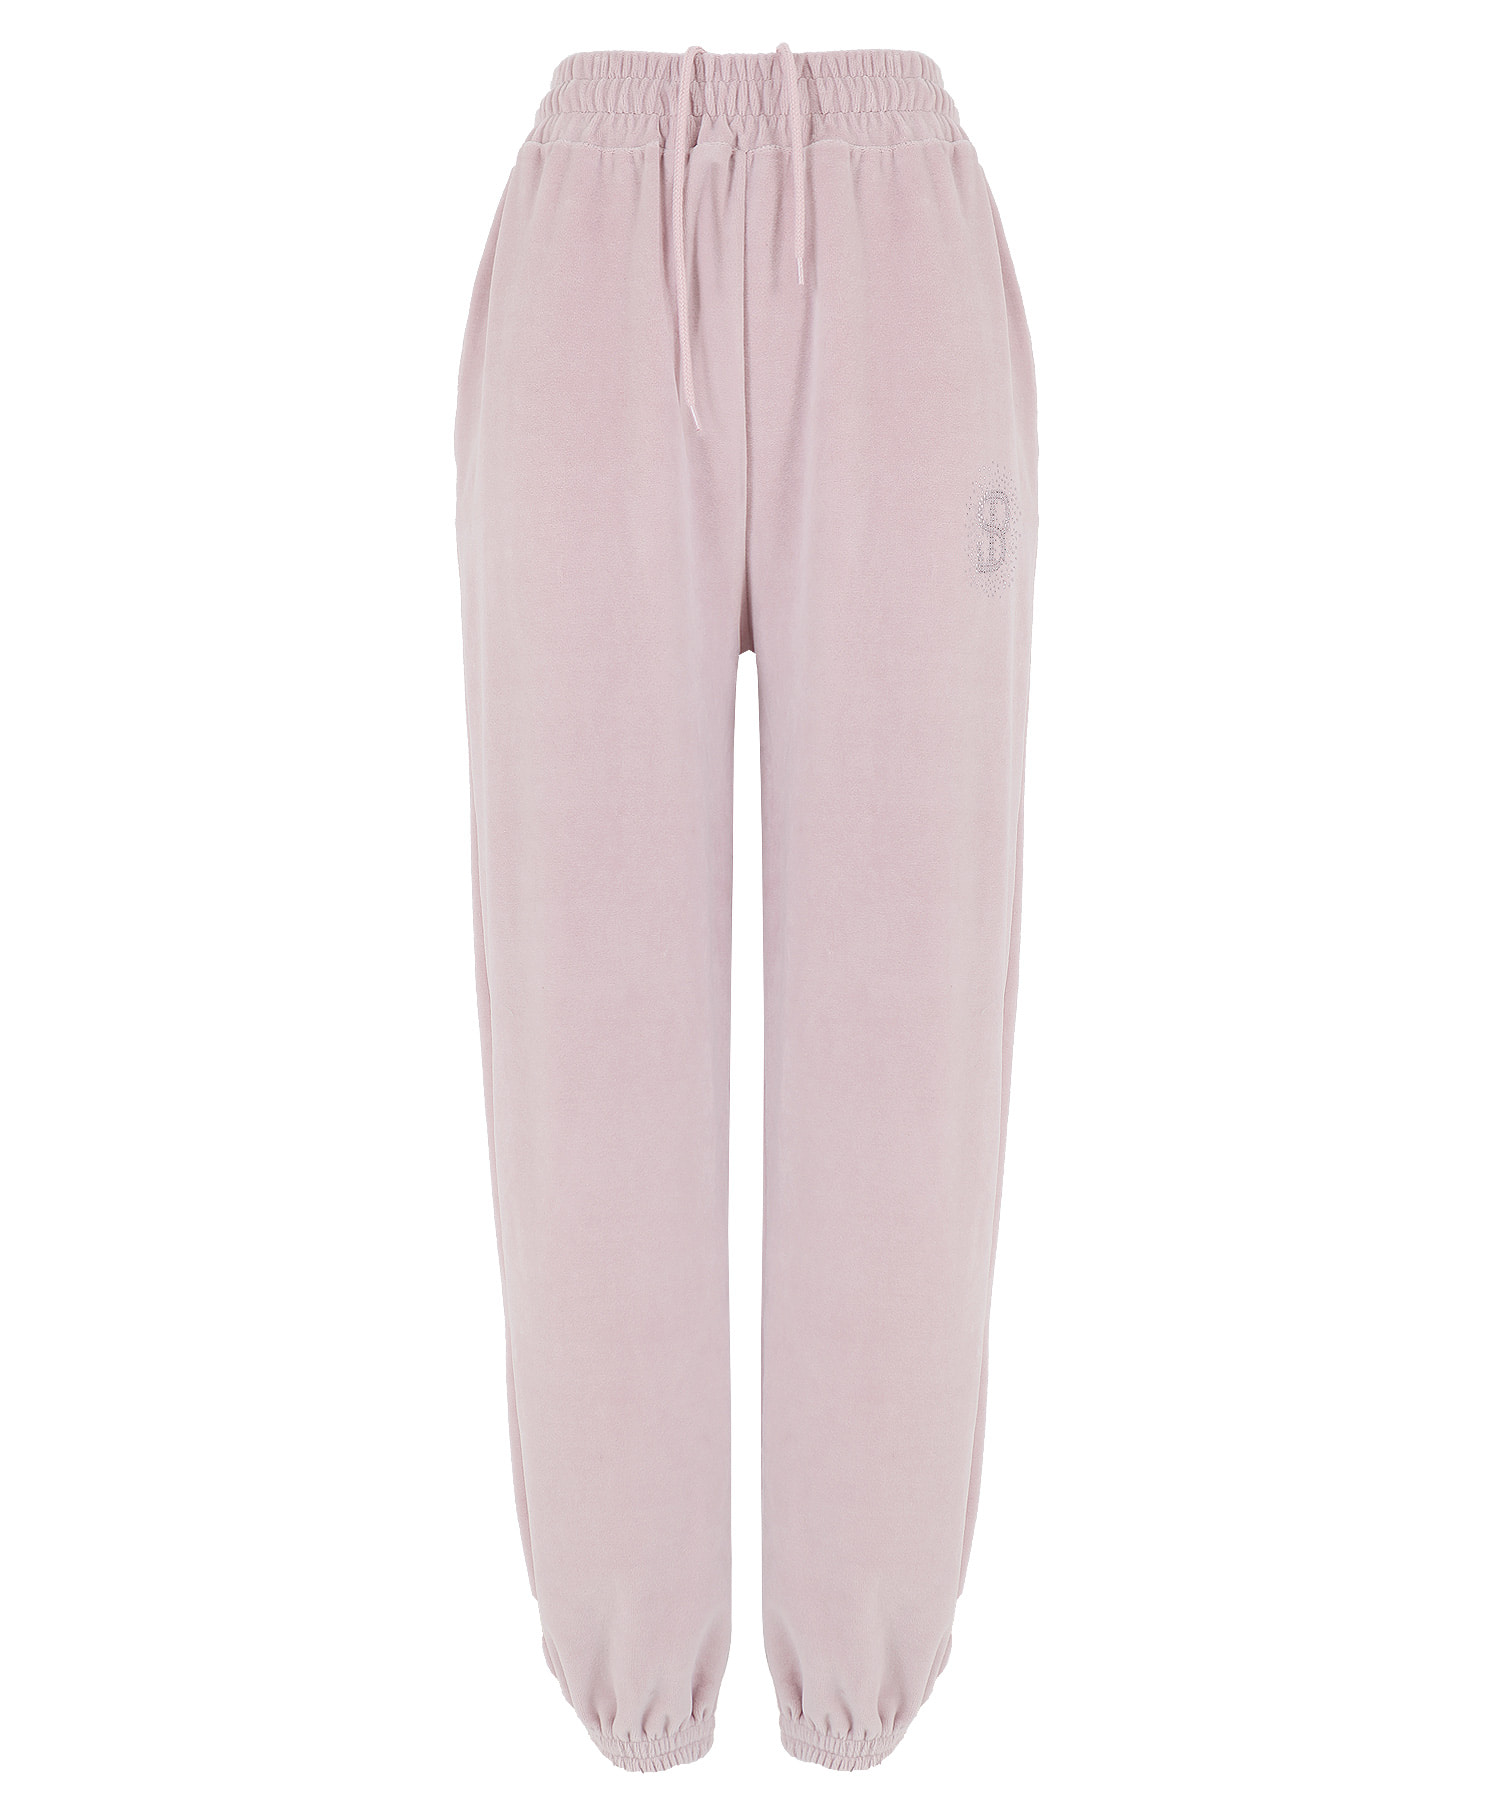 RELAX JOGGER PANTS IN PINK